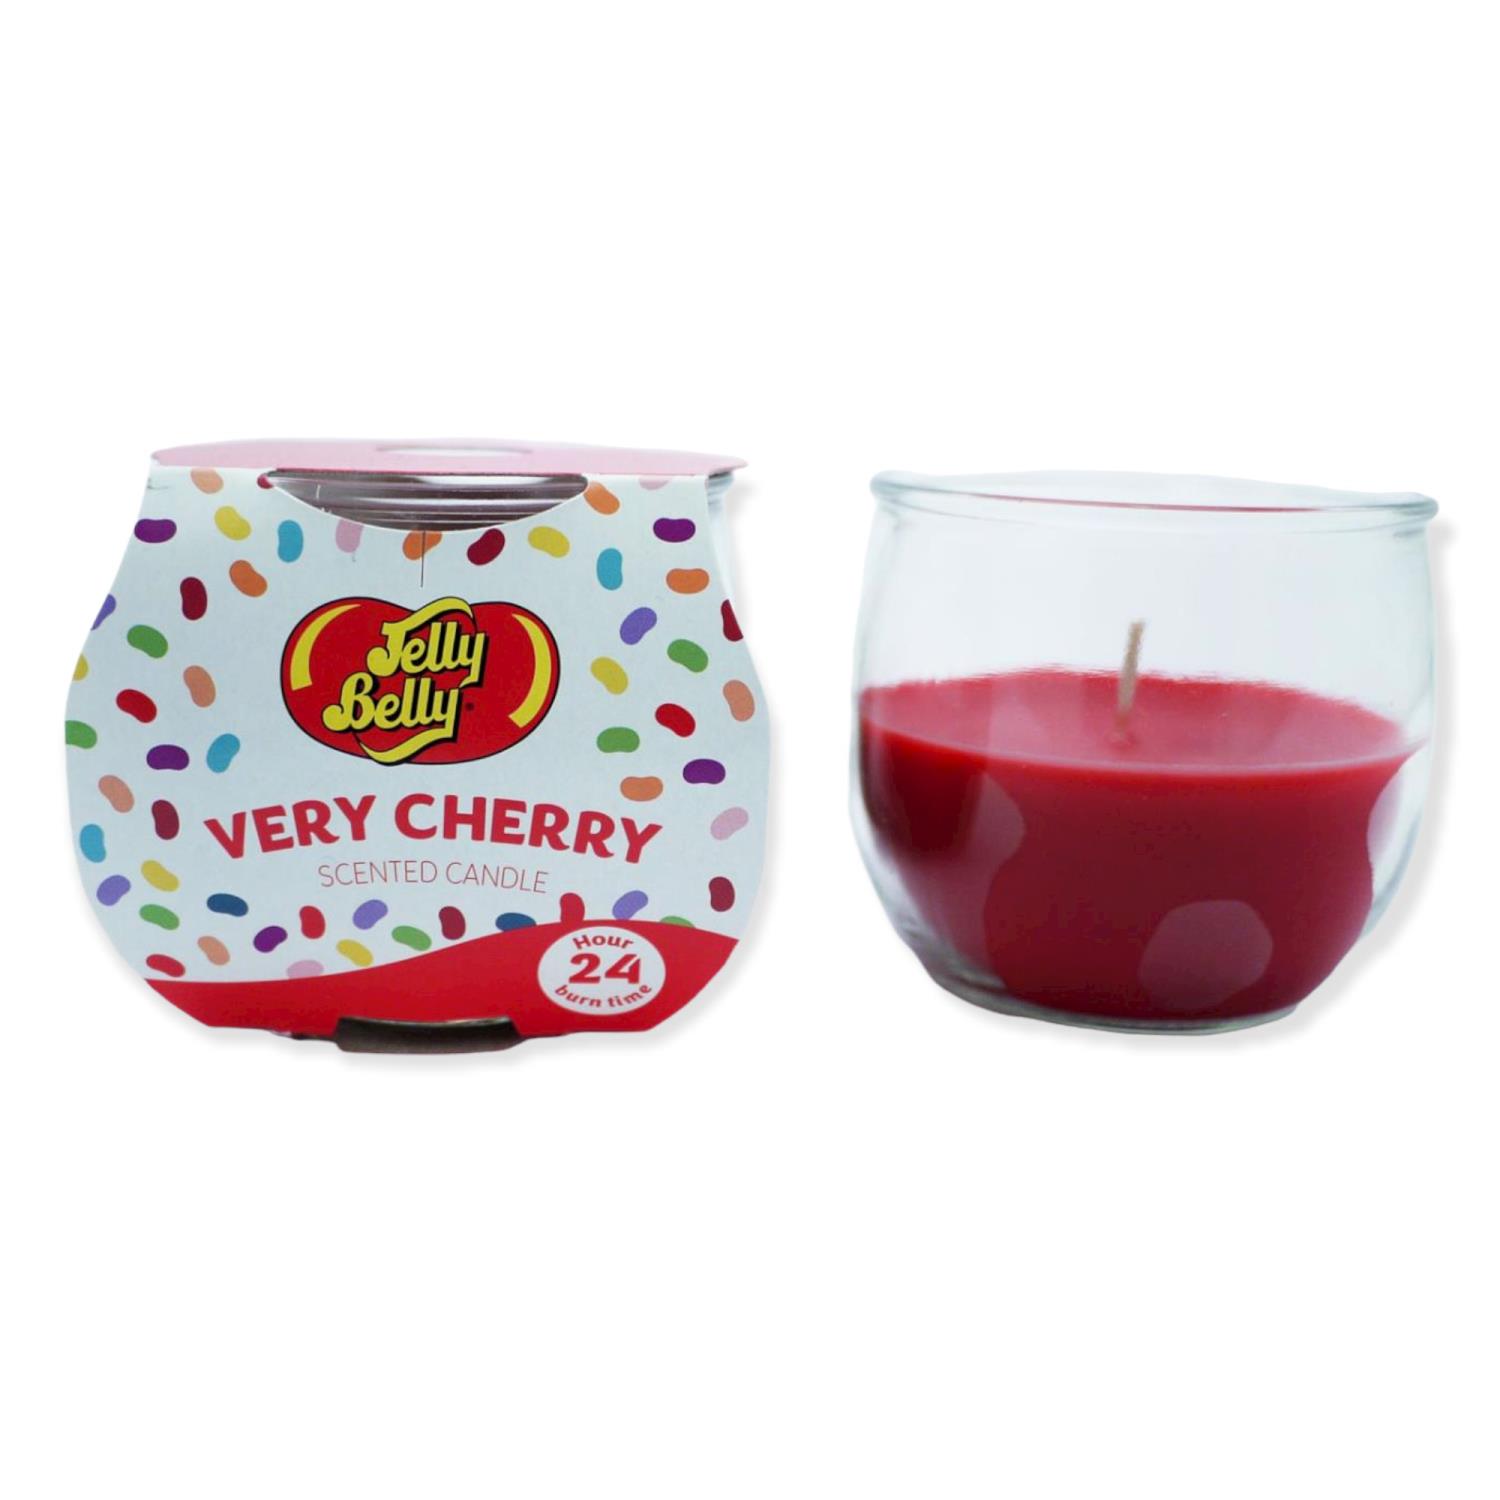 Jelly Belly Very Cherry Candle 85g